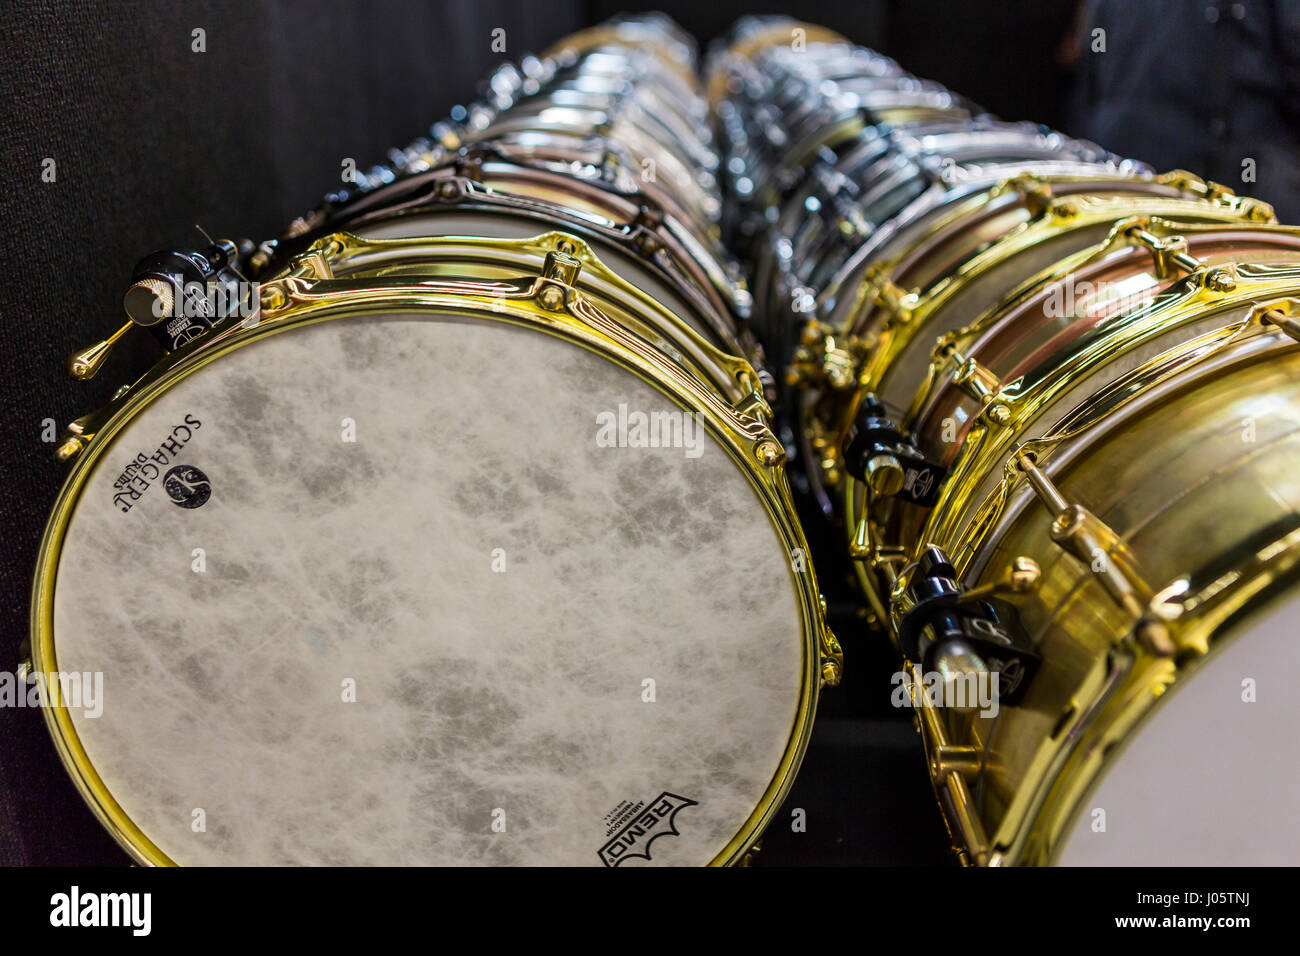 Frankfurt/Main, Germany. 5th April, 2017. Snare drums of manufacturer  Schagerl Drums (Austria). Fotocredit: Christian Lademann Stock Photo - Alamy